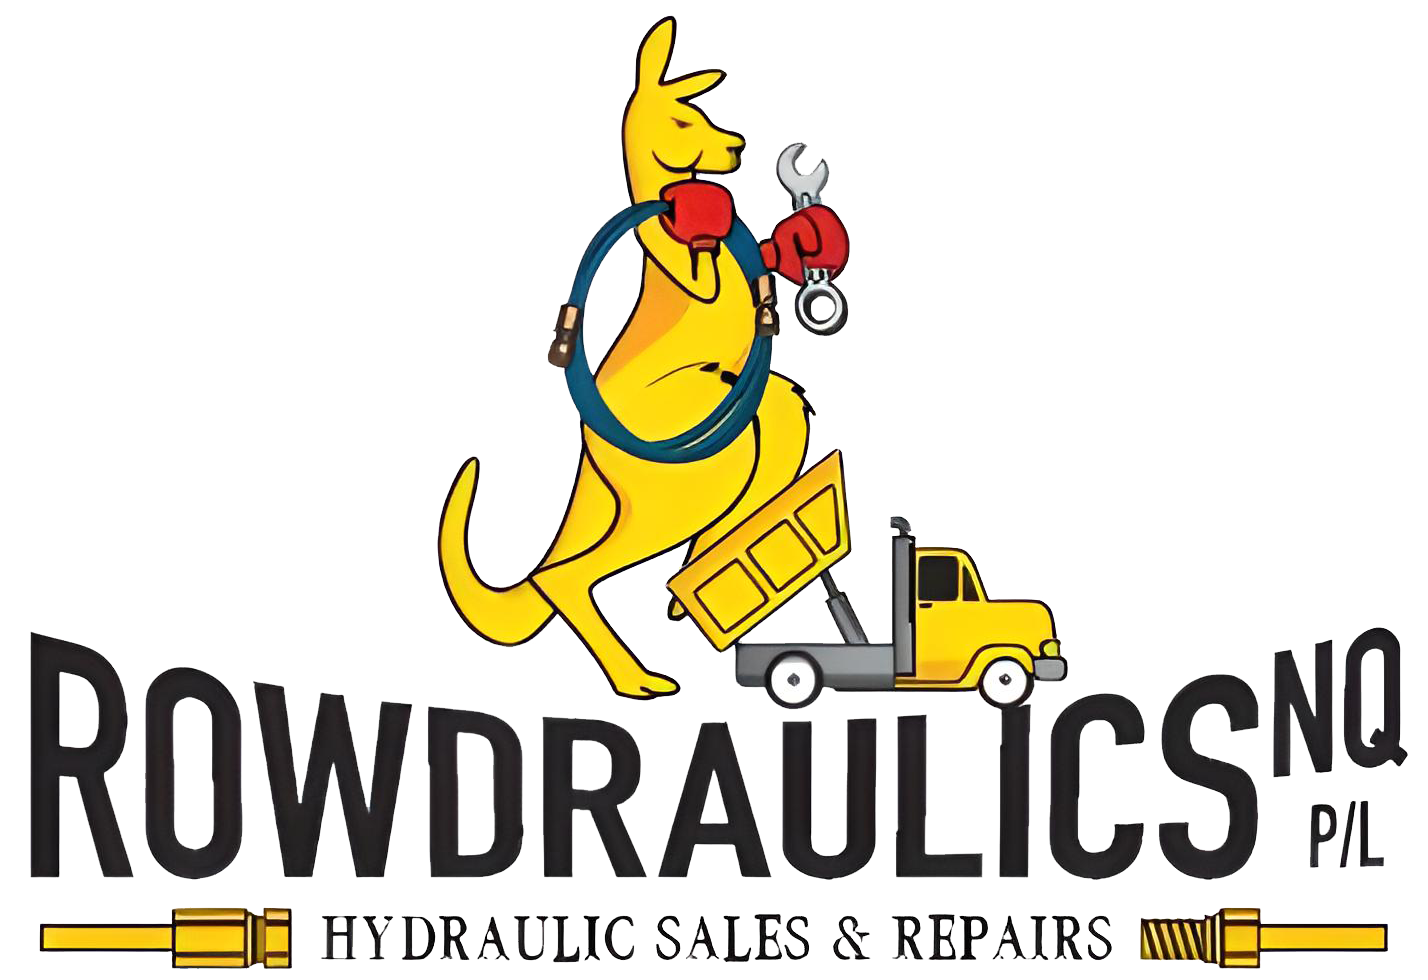 Rowdraulics NQ: Servicing Hydraulic Systems in Townsville